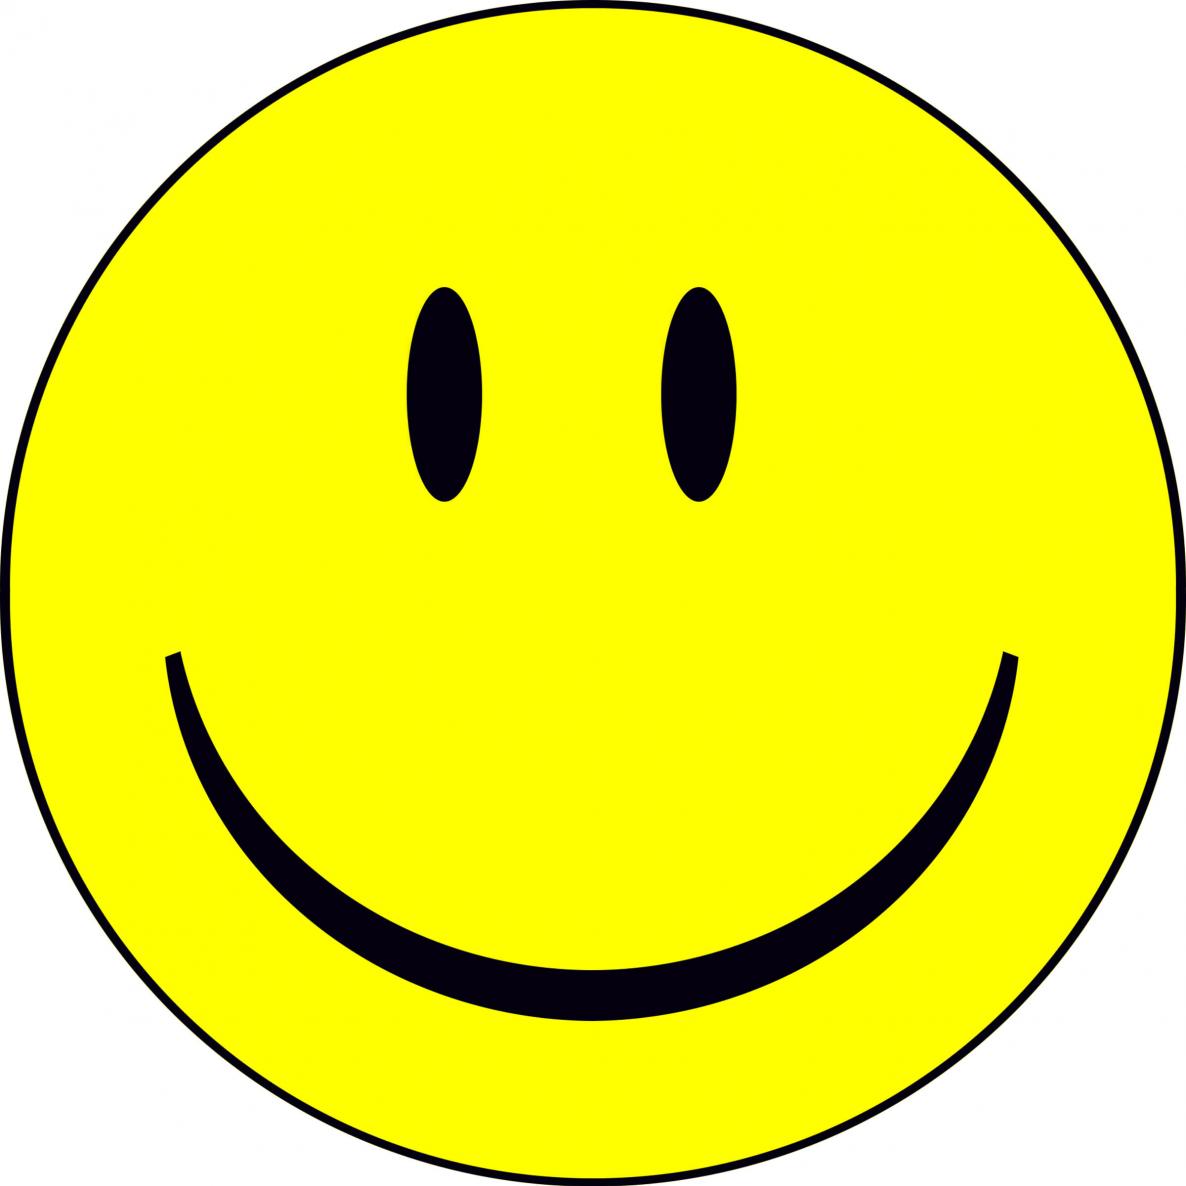 Winking Smiley Face Smile Day Site - ClipArt Best - ClipArt Best